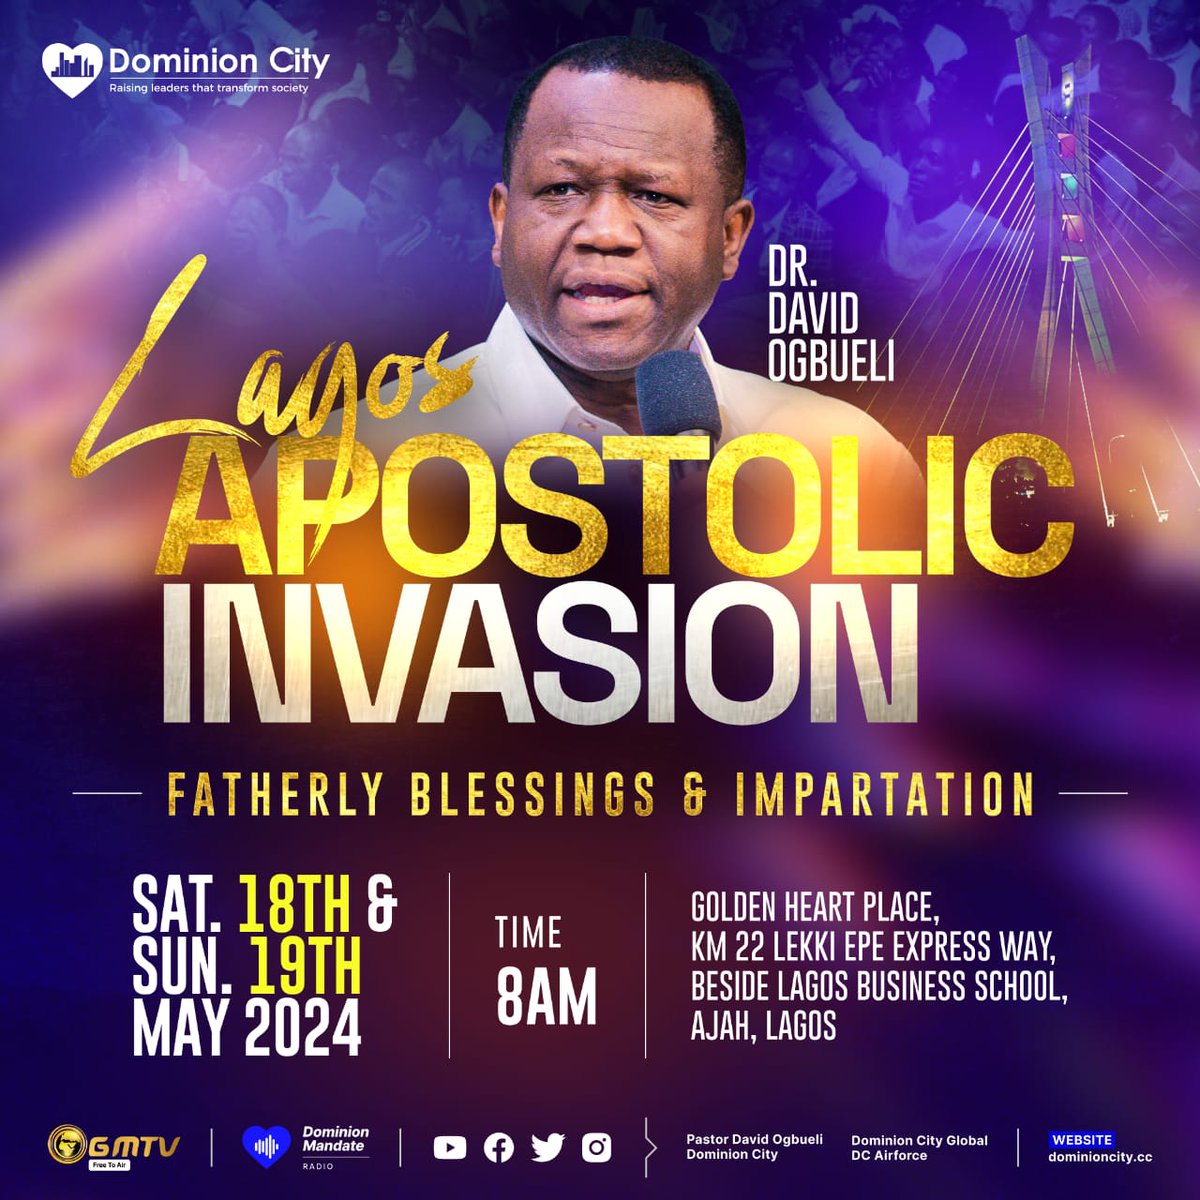 Fathers are carriers of Blessings, Graces & Inheritances of a family.

Lagos & SOUTHWEST its your turn to lay hold of destiny and life changing treasures. 

3 days to go! Dont miss this weekend.

#dominioncity #pastordavidogbueli #apostolicinvasion #southwestnigeria #lagosnigeria